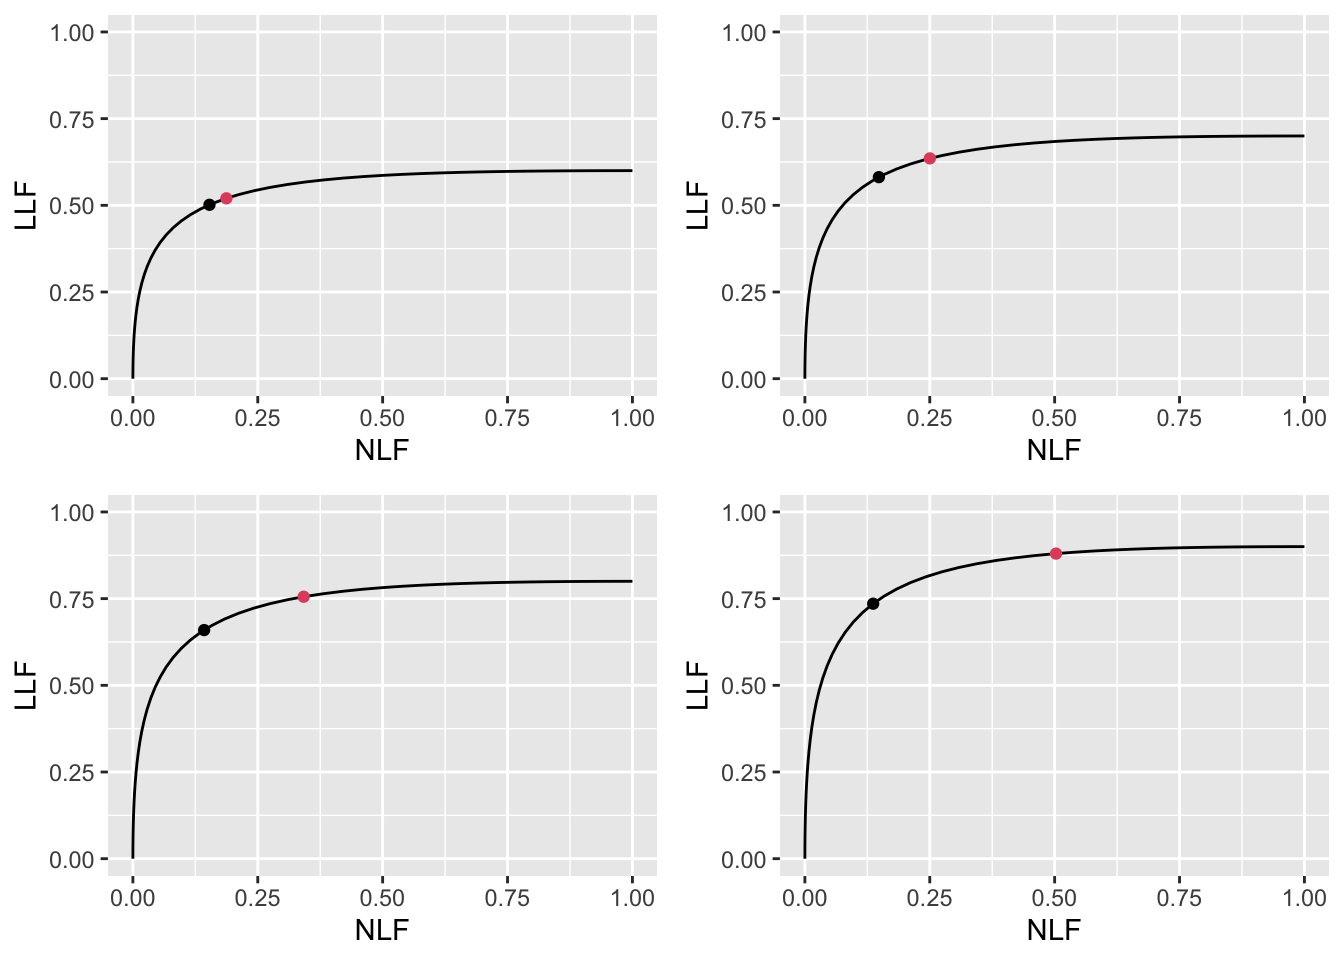 Varying $\nu$ FROC plots with superimposed operating points. The red dot corresponds to $\text{wAFROC}_\text{AUC}$ optimization and the black dot to Youden-index optimization. The values of $\nu$ are: top-left $\nu = 0.6$, top-right $\nu = 0.7$, bottom-left $\nu = 0.8$ and bottom-right $\nu = 0.9$. Each red dot is above the corresponding black dot and their separation increases as $\nu$ increases, i.e., as CAD performance increases.